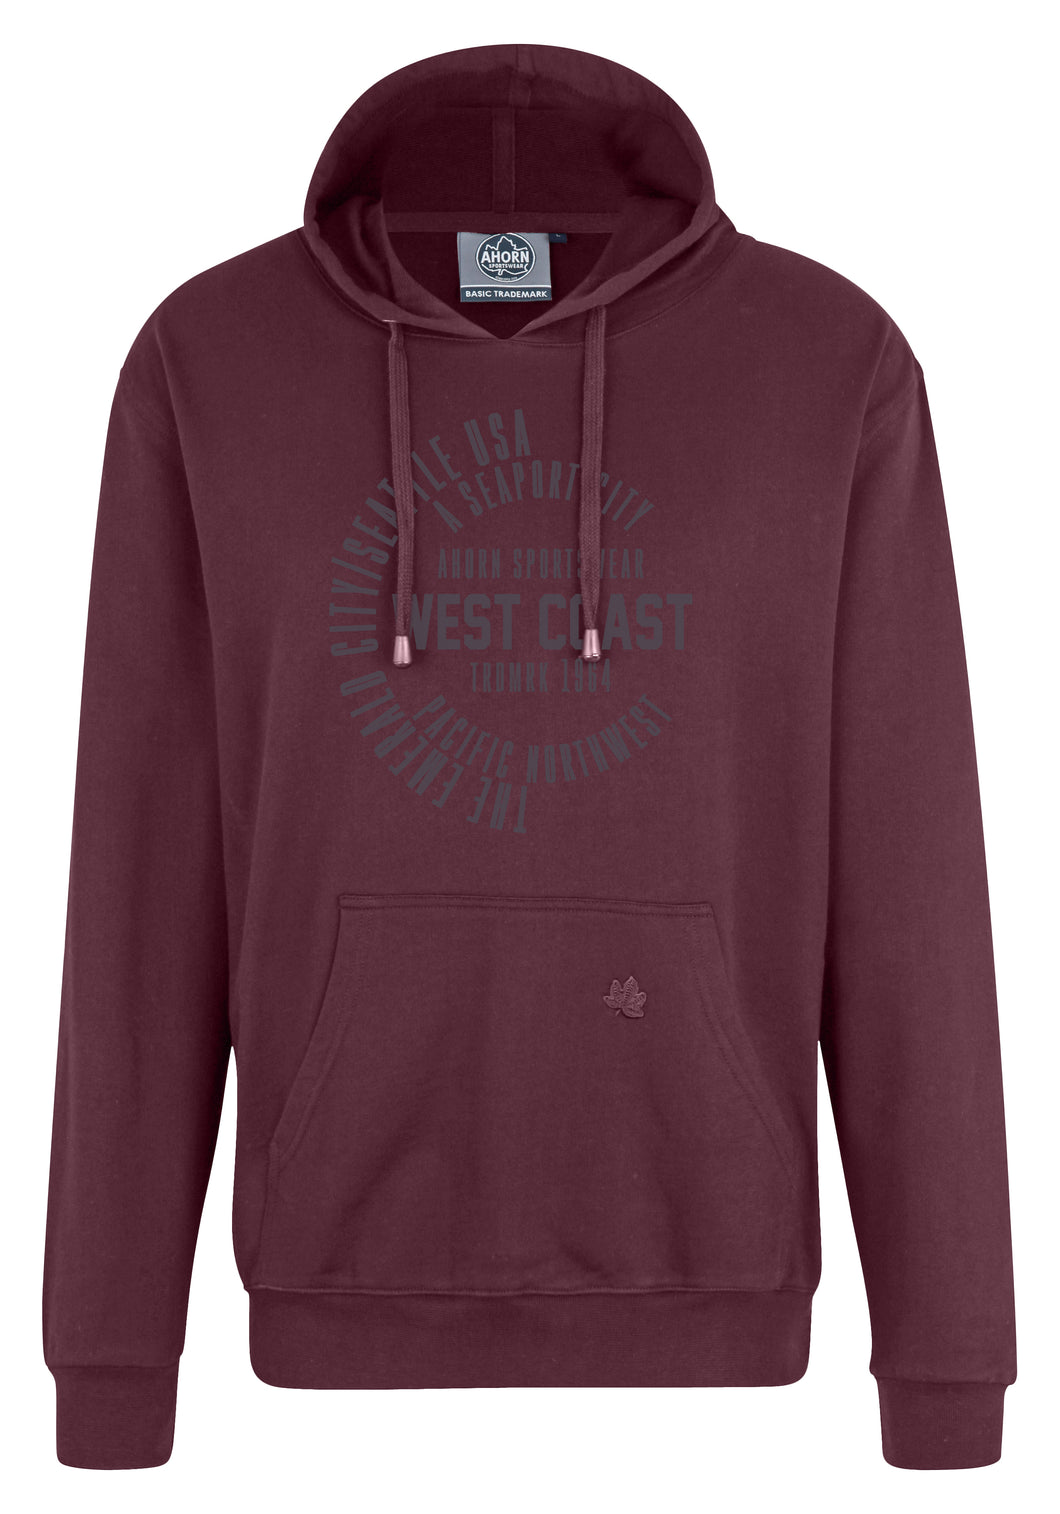 Ahorn Wine West Coast Cotton Hoodie Big and Tall